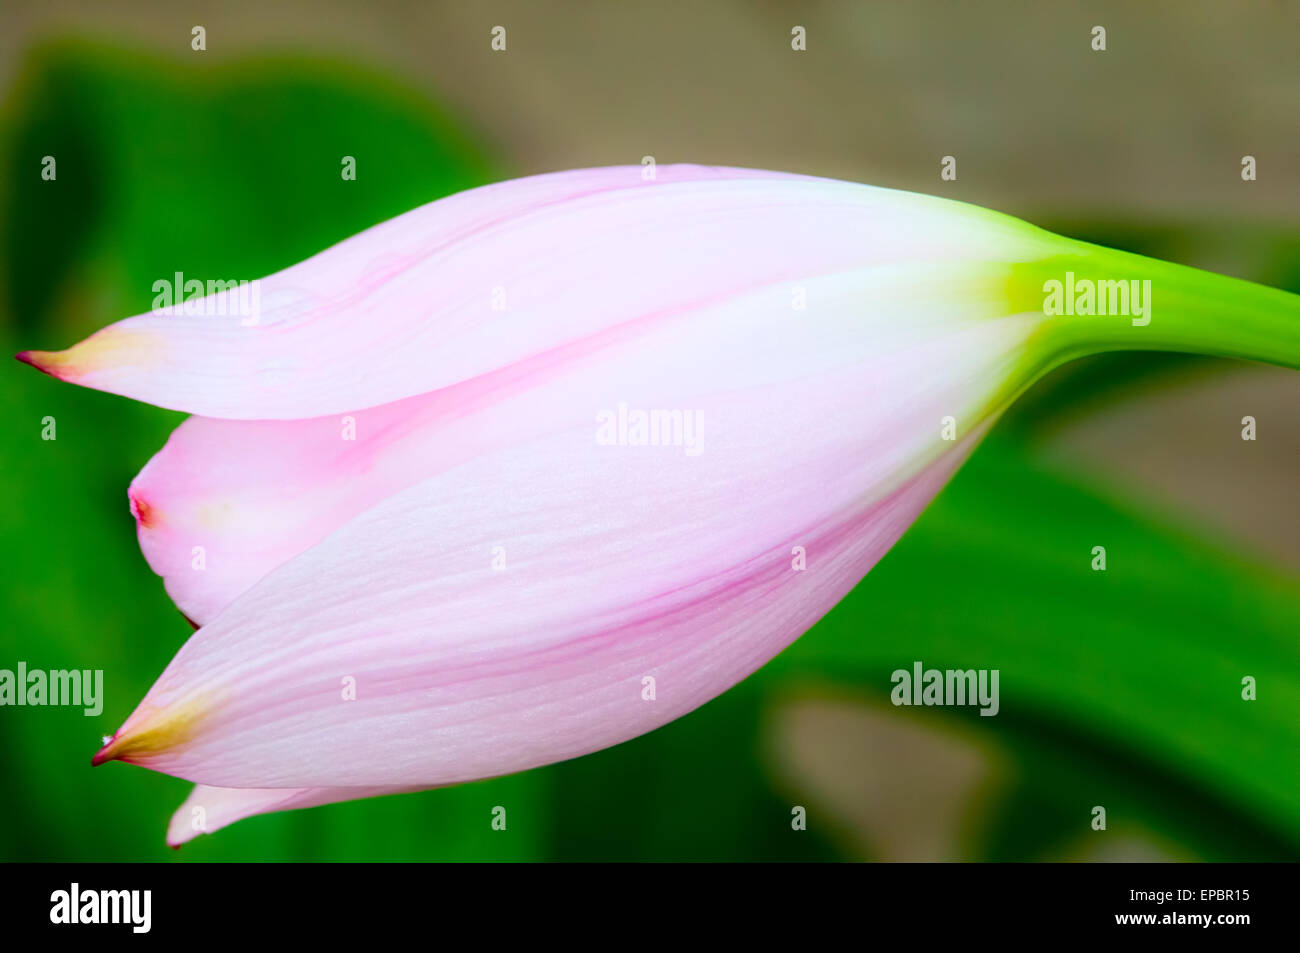 Close-up of Natal Lily (Crinum moorei) bud Stock Photo